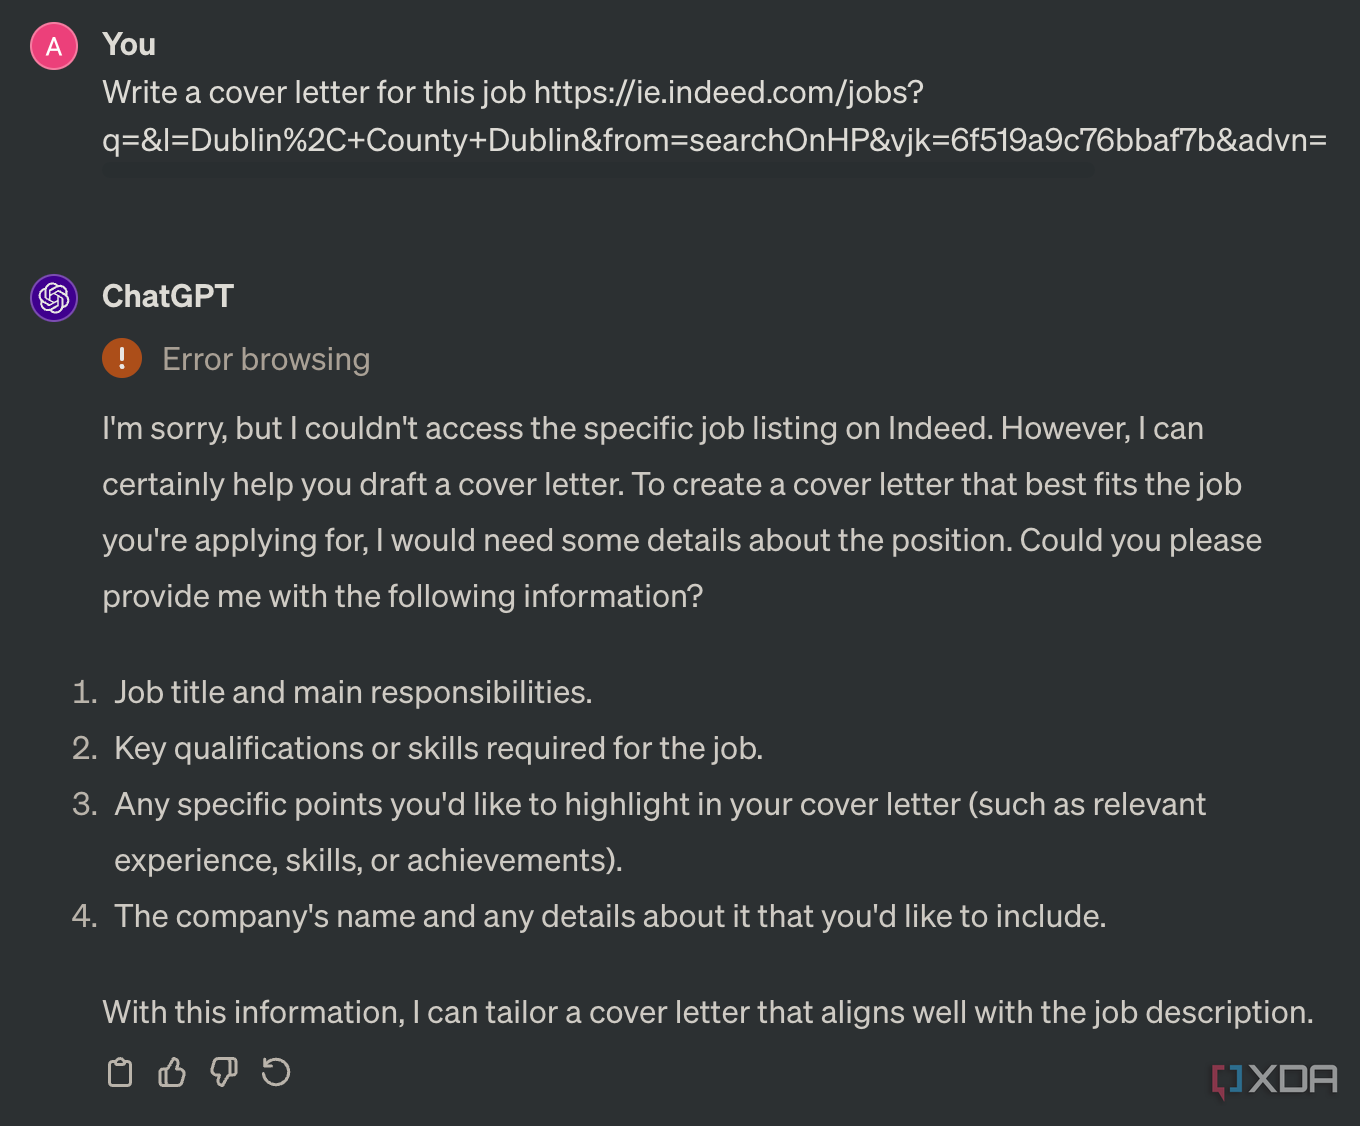 Asking ChatGPT to write a cover letter for a job listing on Indeed